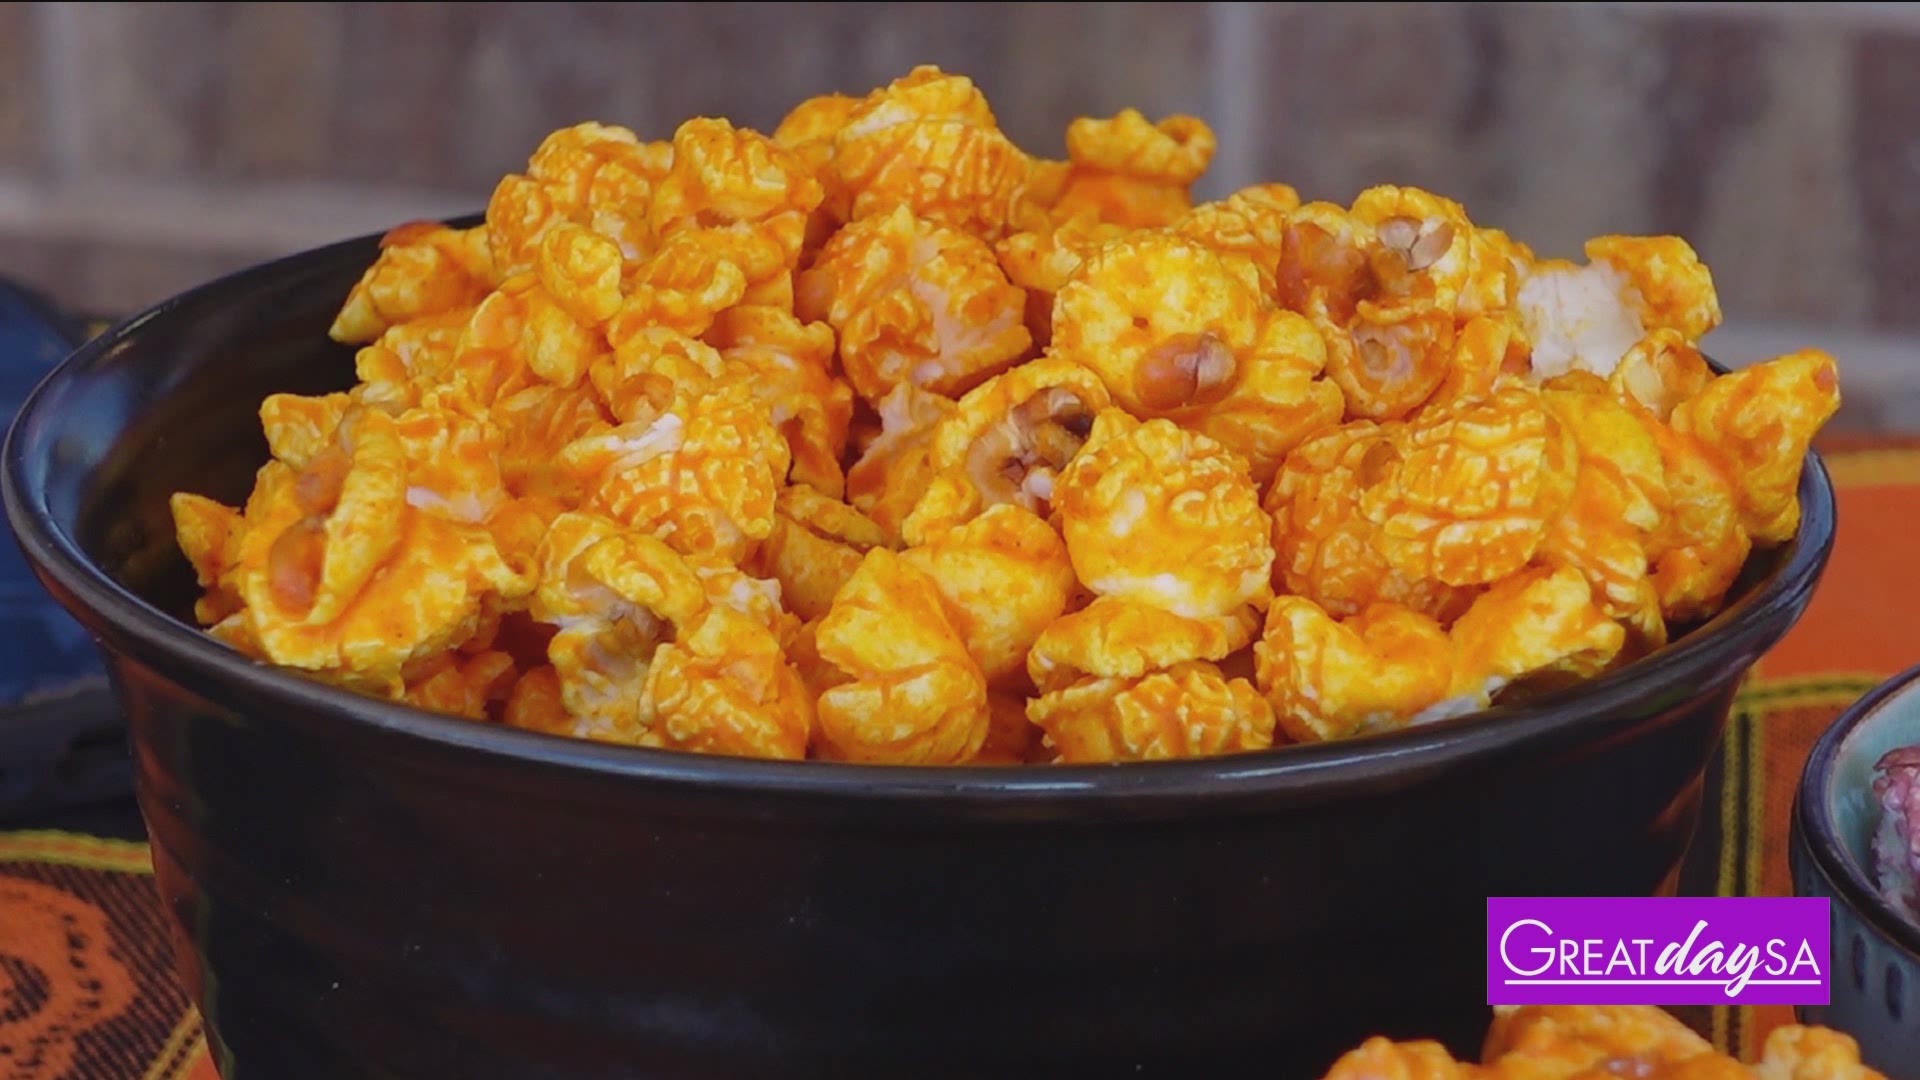 Do you have what it takes to try this hot popcorn? Digital reporter Lexi Hazlett does 😮